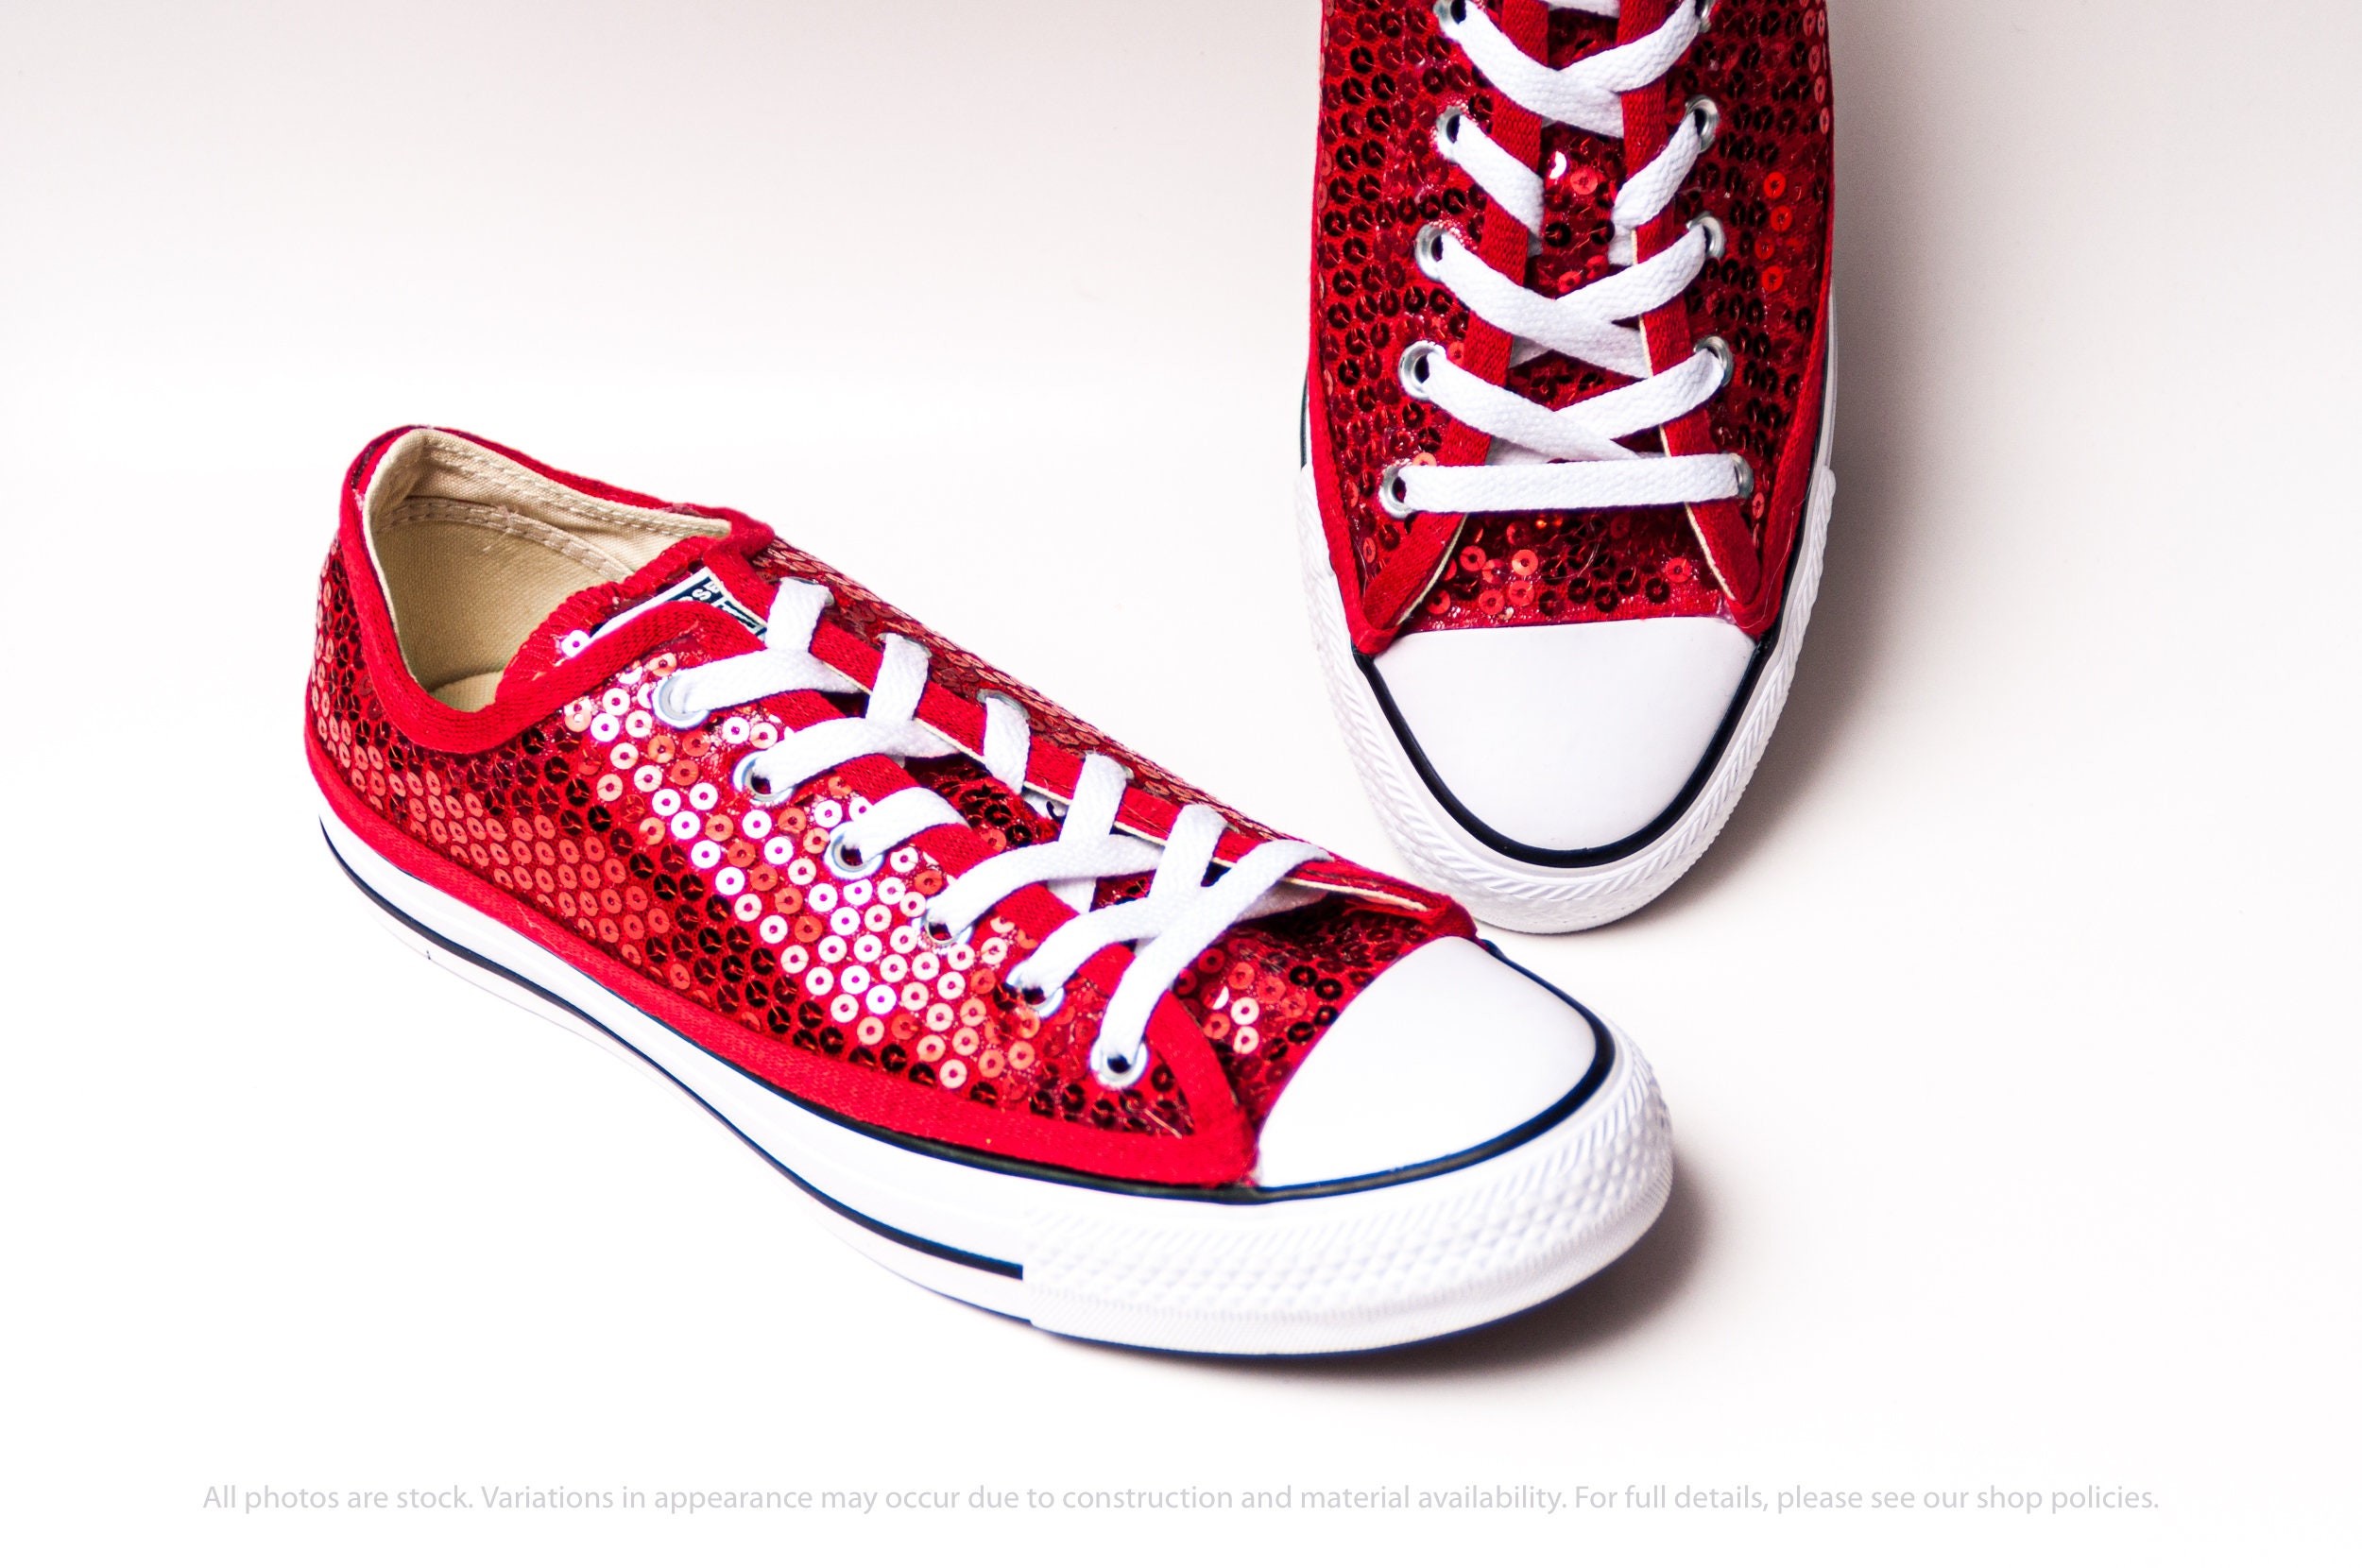 Red Glitter Custom Made Converse All Stars Wedding Homecoming Prom Christmas Holiday Sparkling Shoes (NEW) Trending Now islamiyyat.com